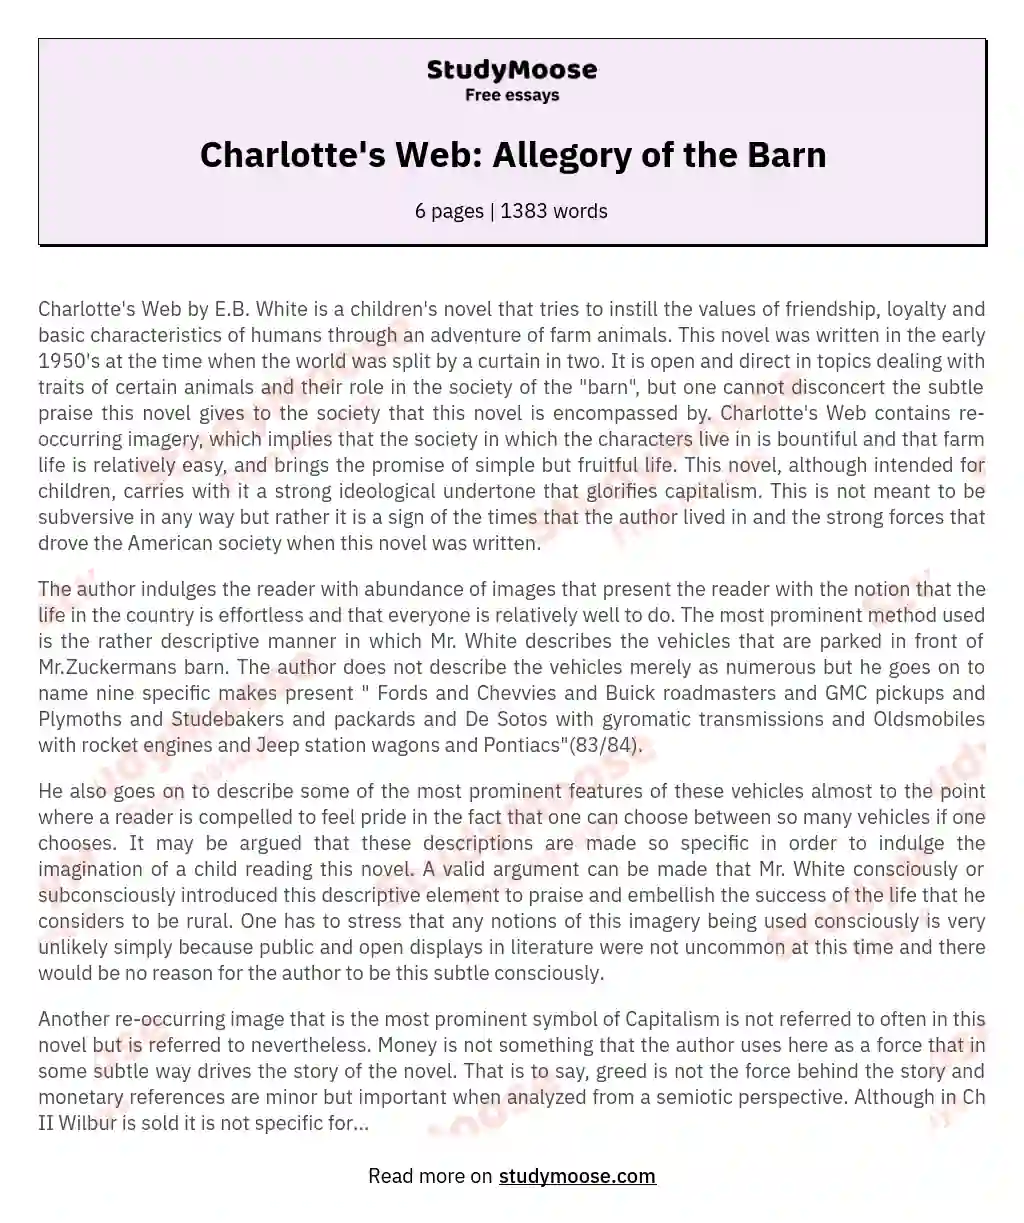 Charlotte's Web: Allegory of the Barn